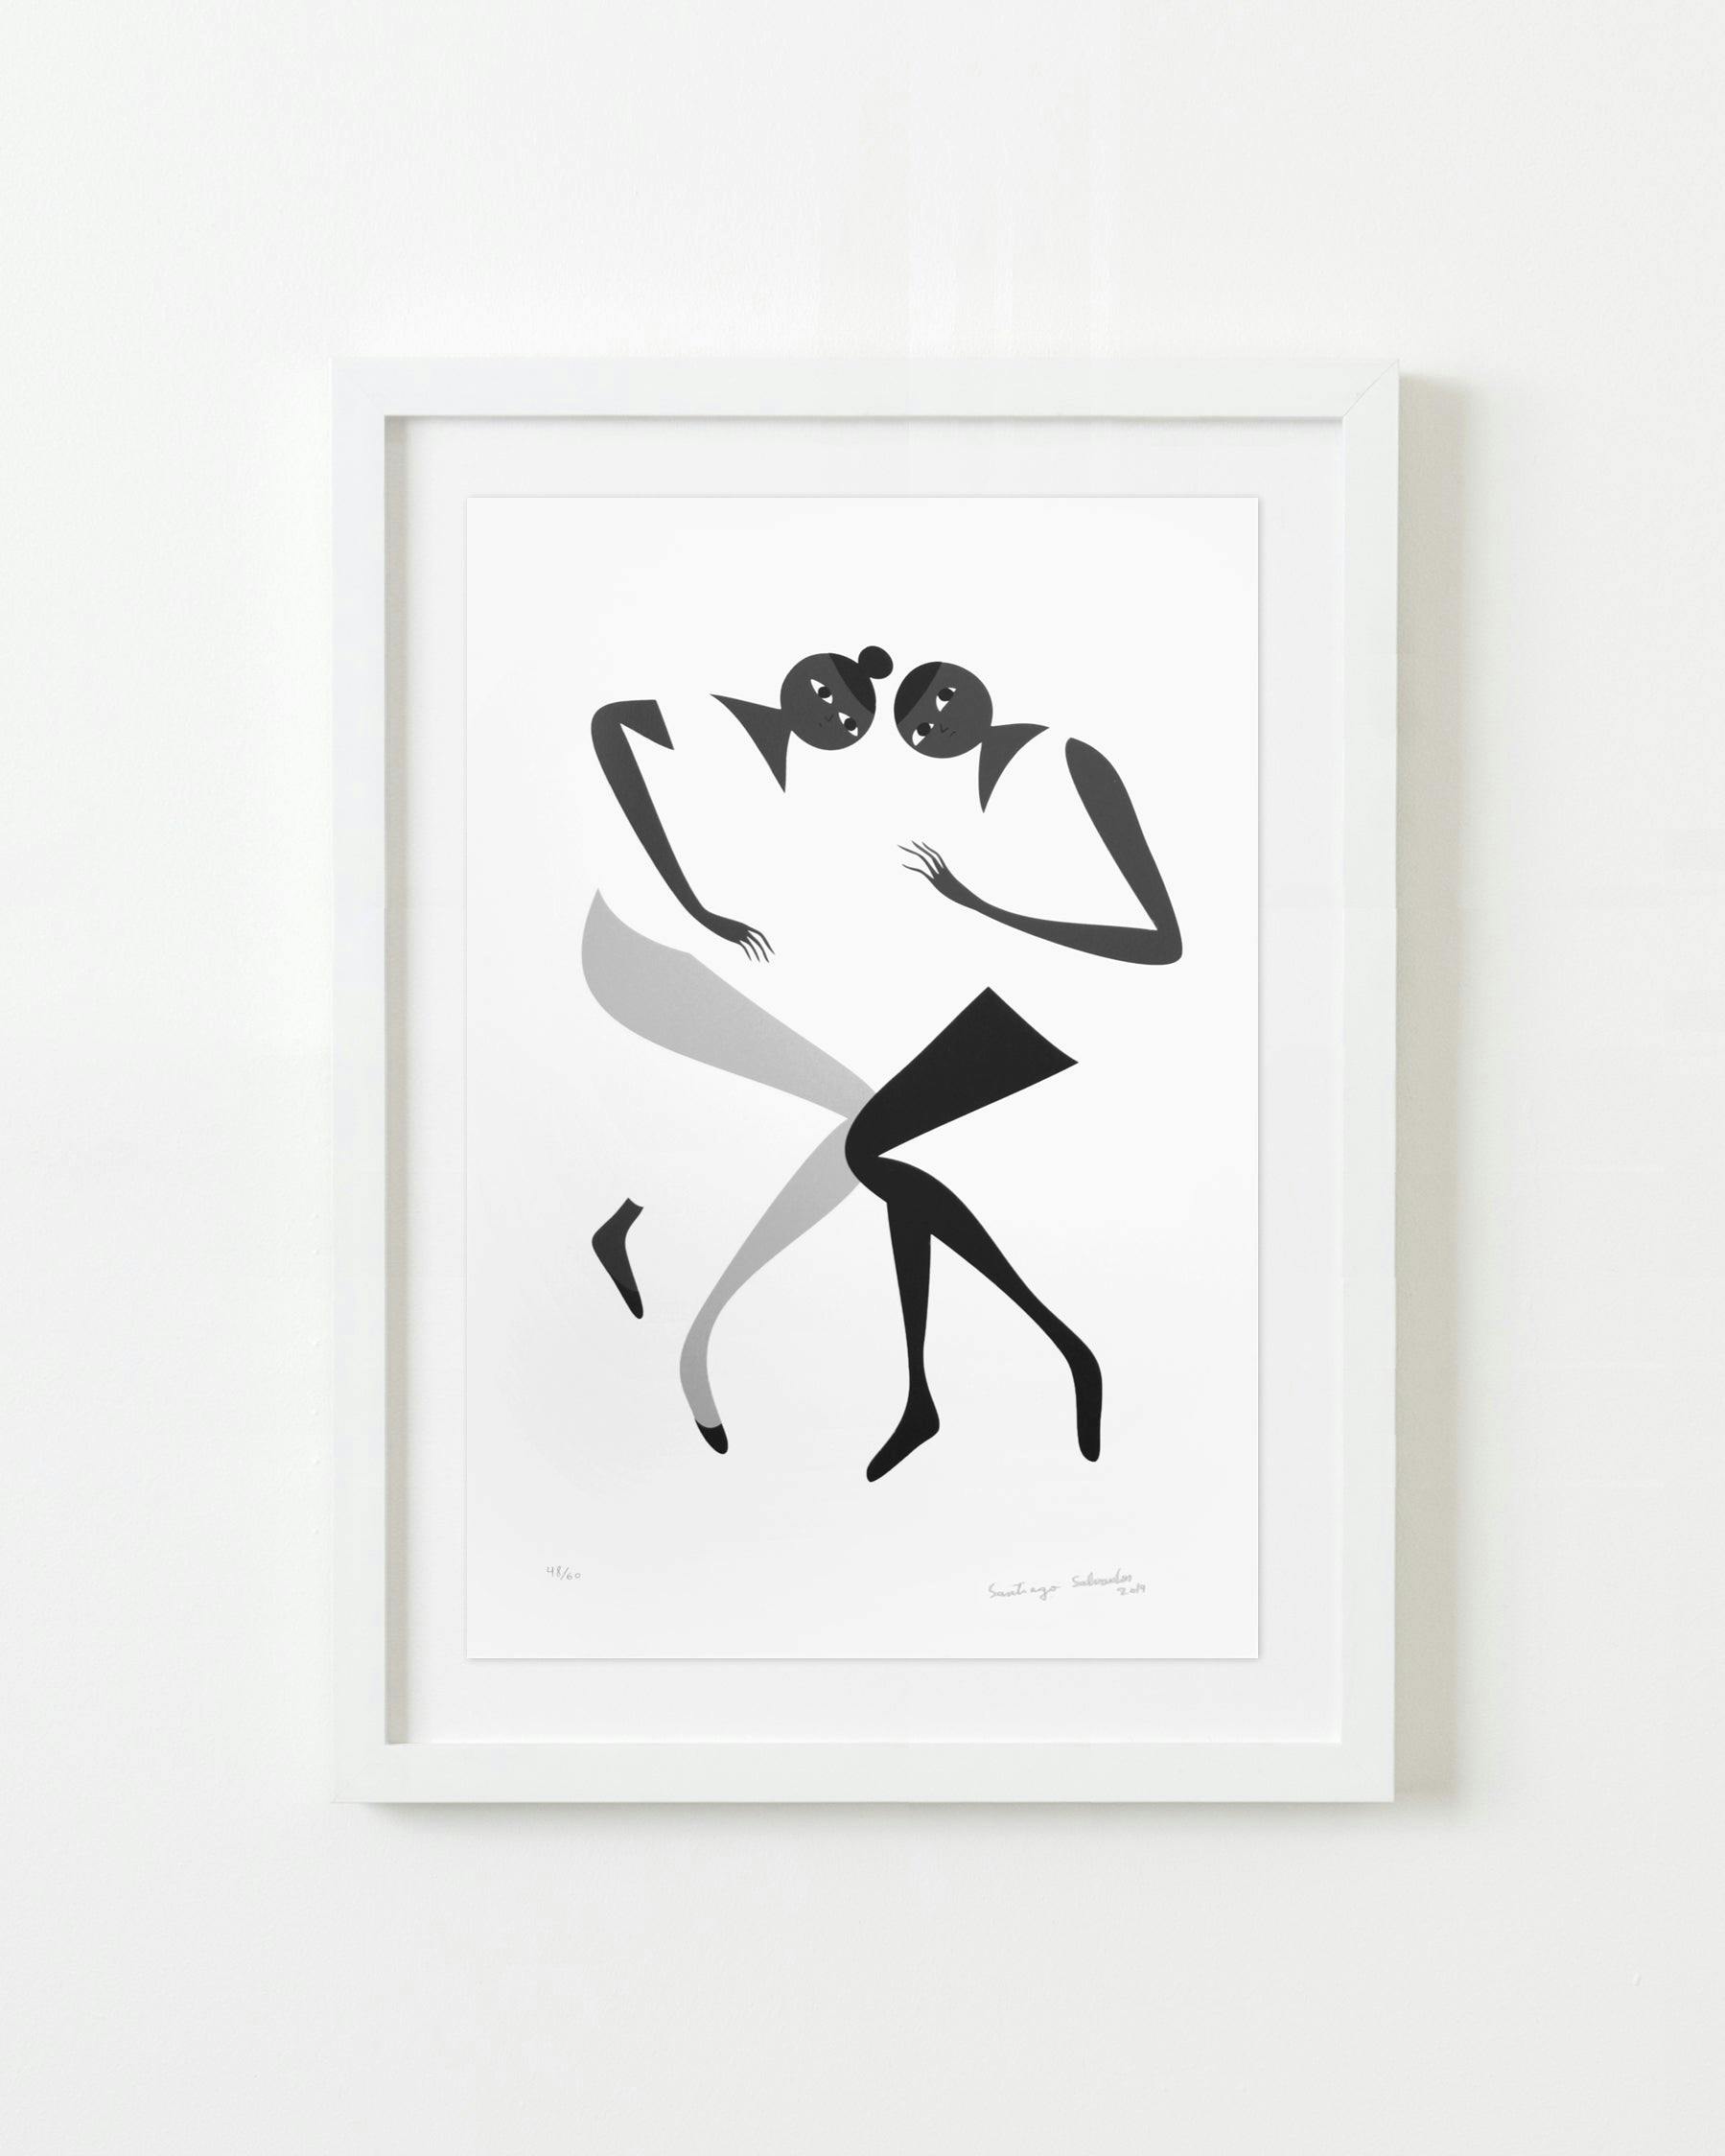 Print by Santiago Ascui titled "Standy Grey 1".